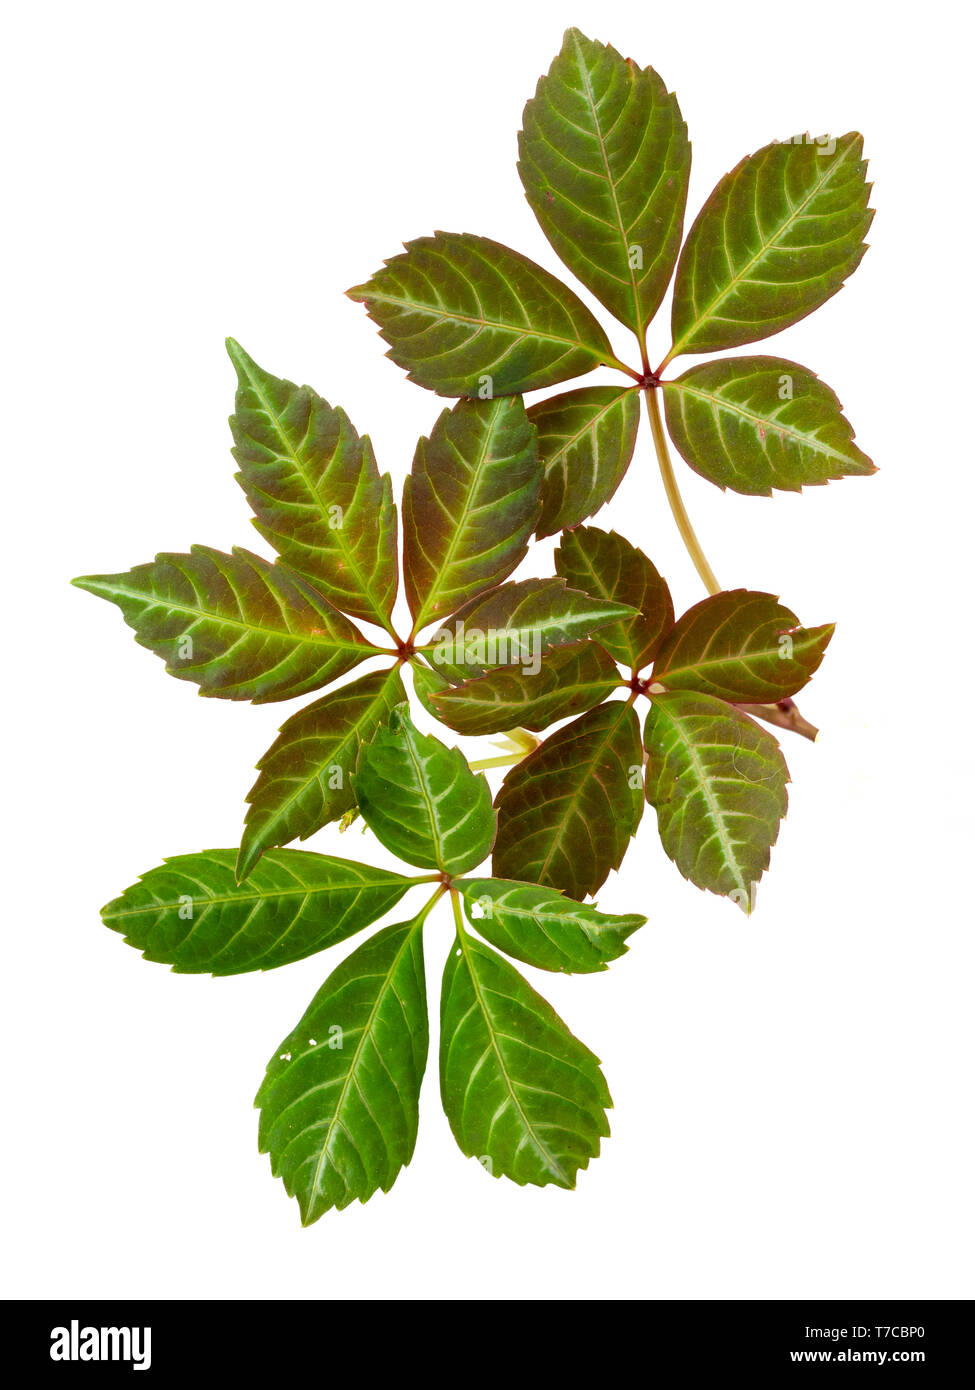 Silver striped midribs and leaf veins of the foliage of the hardy, woody climber, Parthenocissus henryana, on a white background Stock Photo